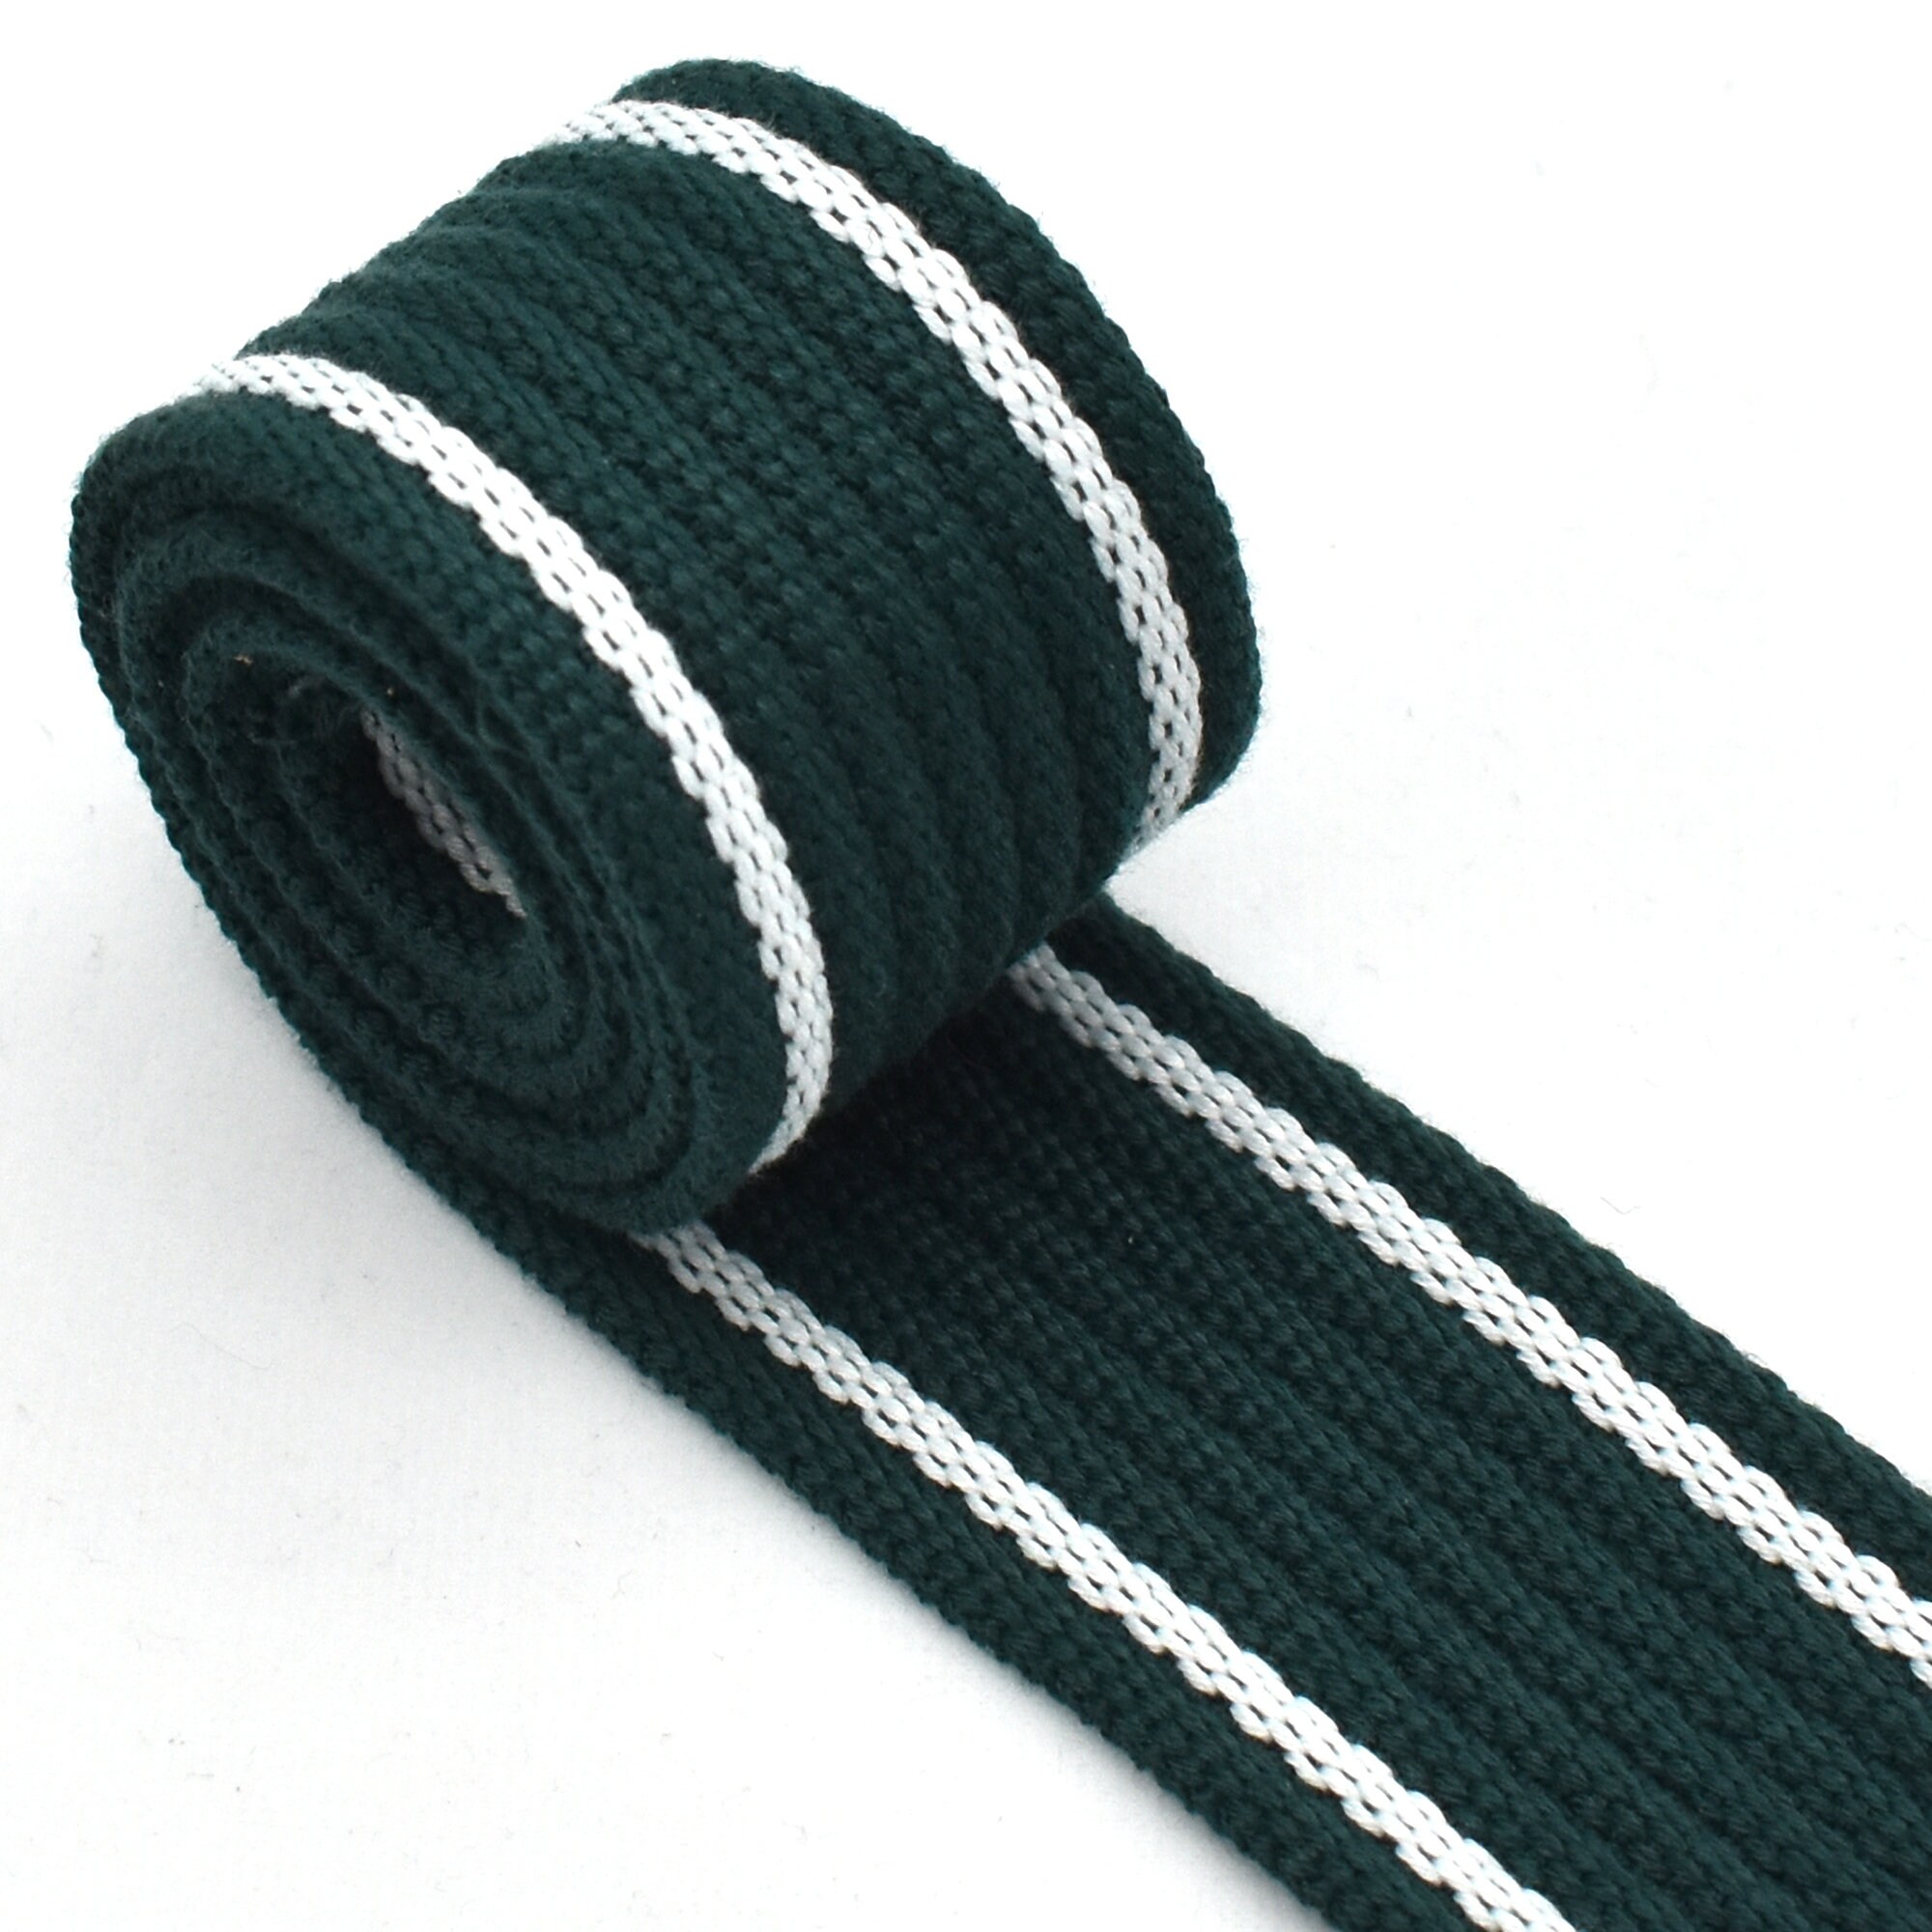 3 yards Cotton Webbing 1.5 Inch Cotton Webbing  Striped Cotton Webbing Belt Dog Collar Webbing DIY Garment Textile Sewing Accessories